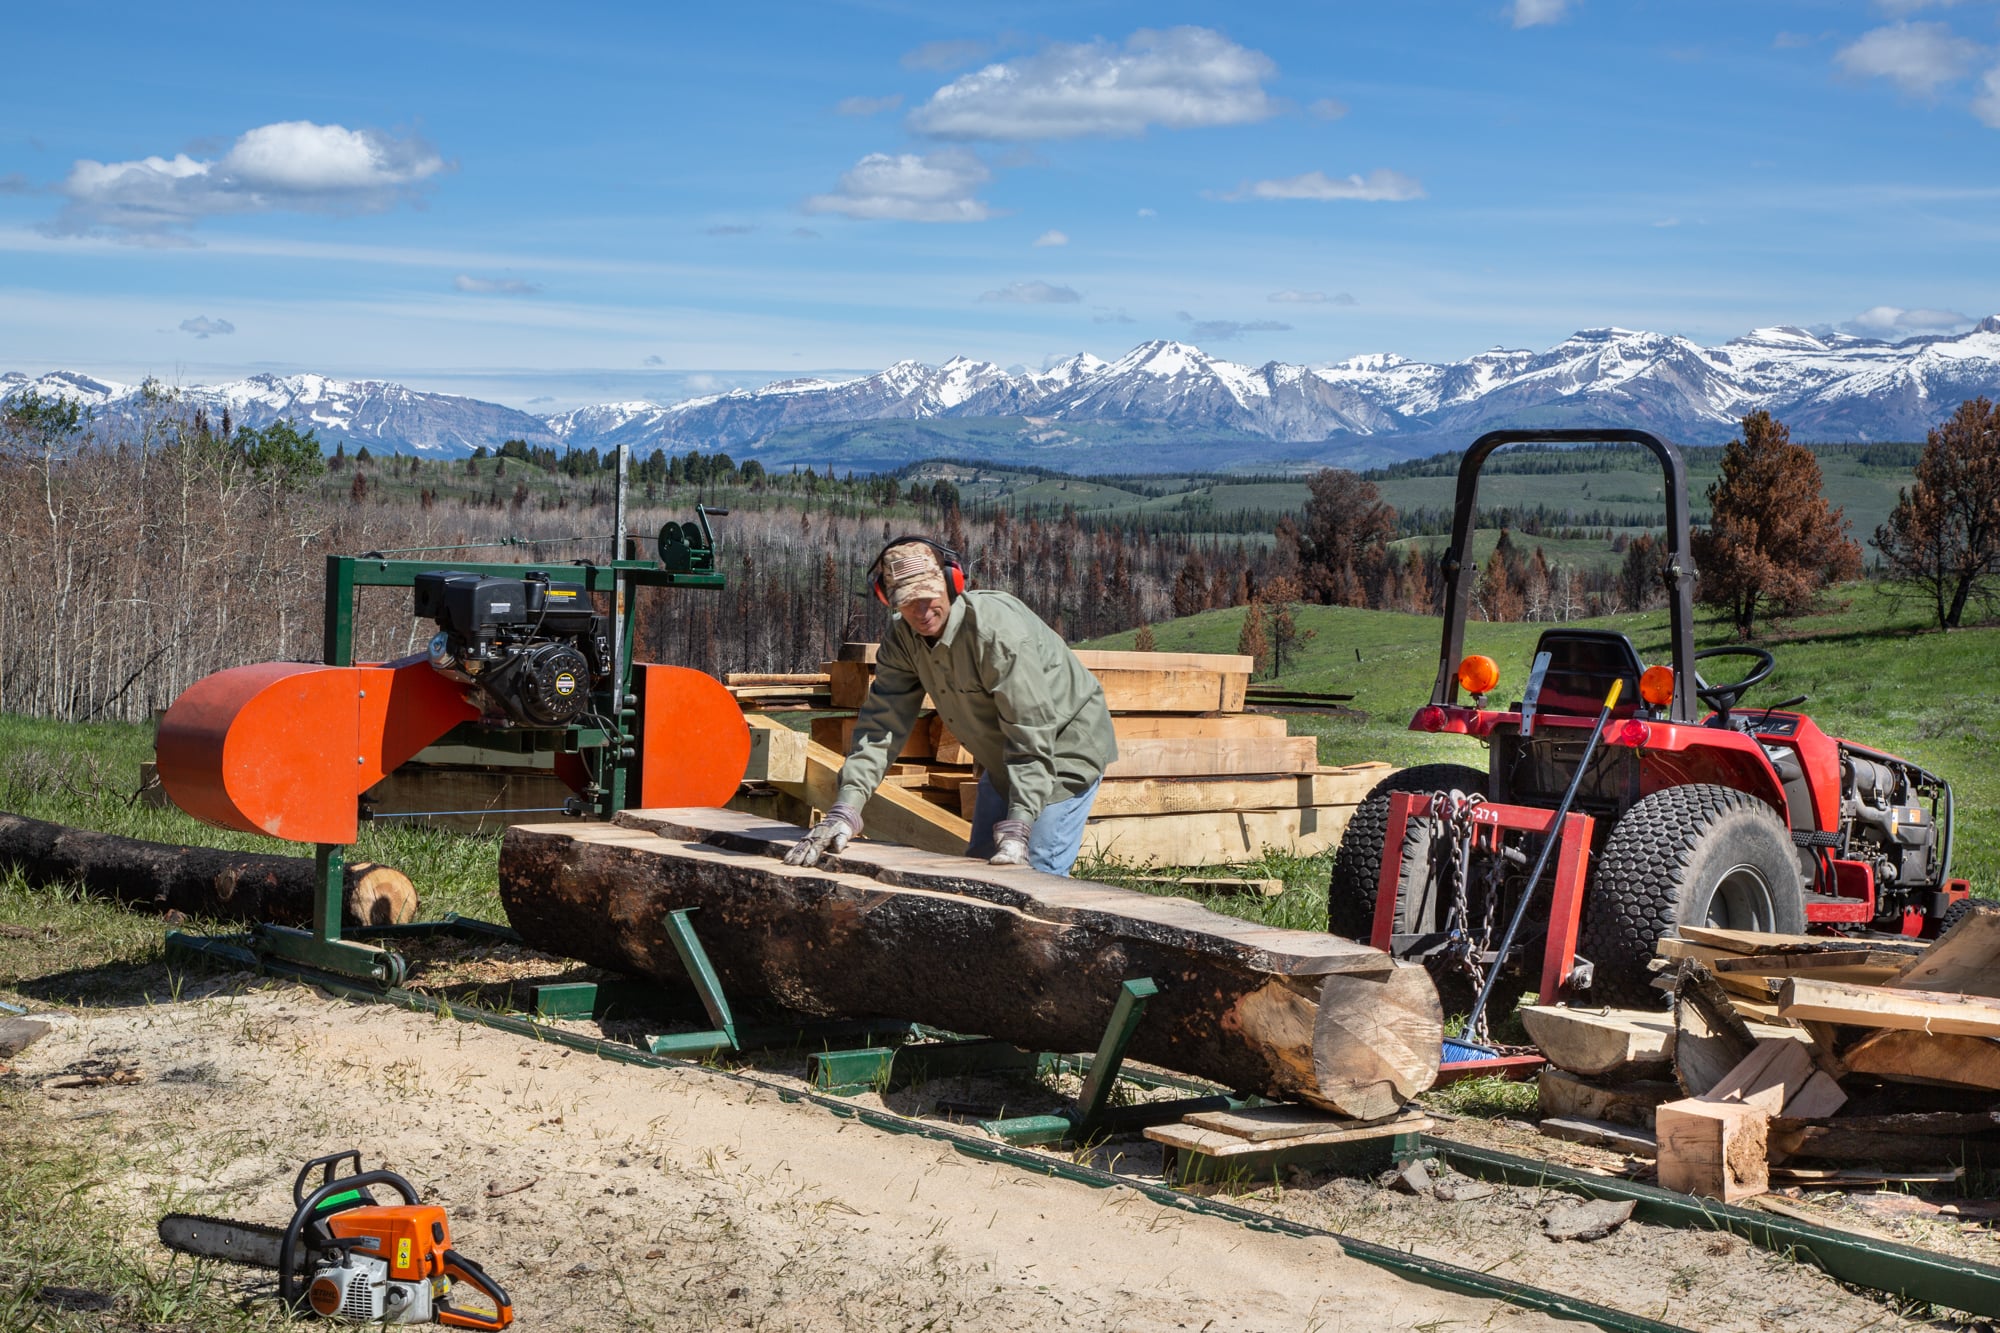 George Bolcato’s portable sawmill allows him to rebuild his home in Hoback Ranches using lumber he cuts from logs that were not badly burned.(Bailey Lewis/News21)